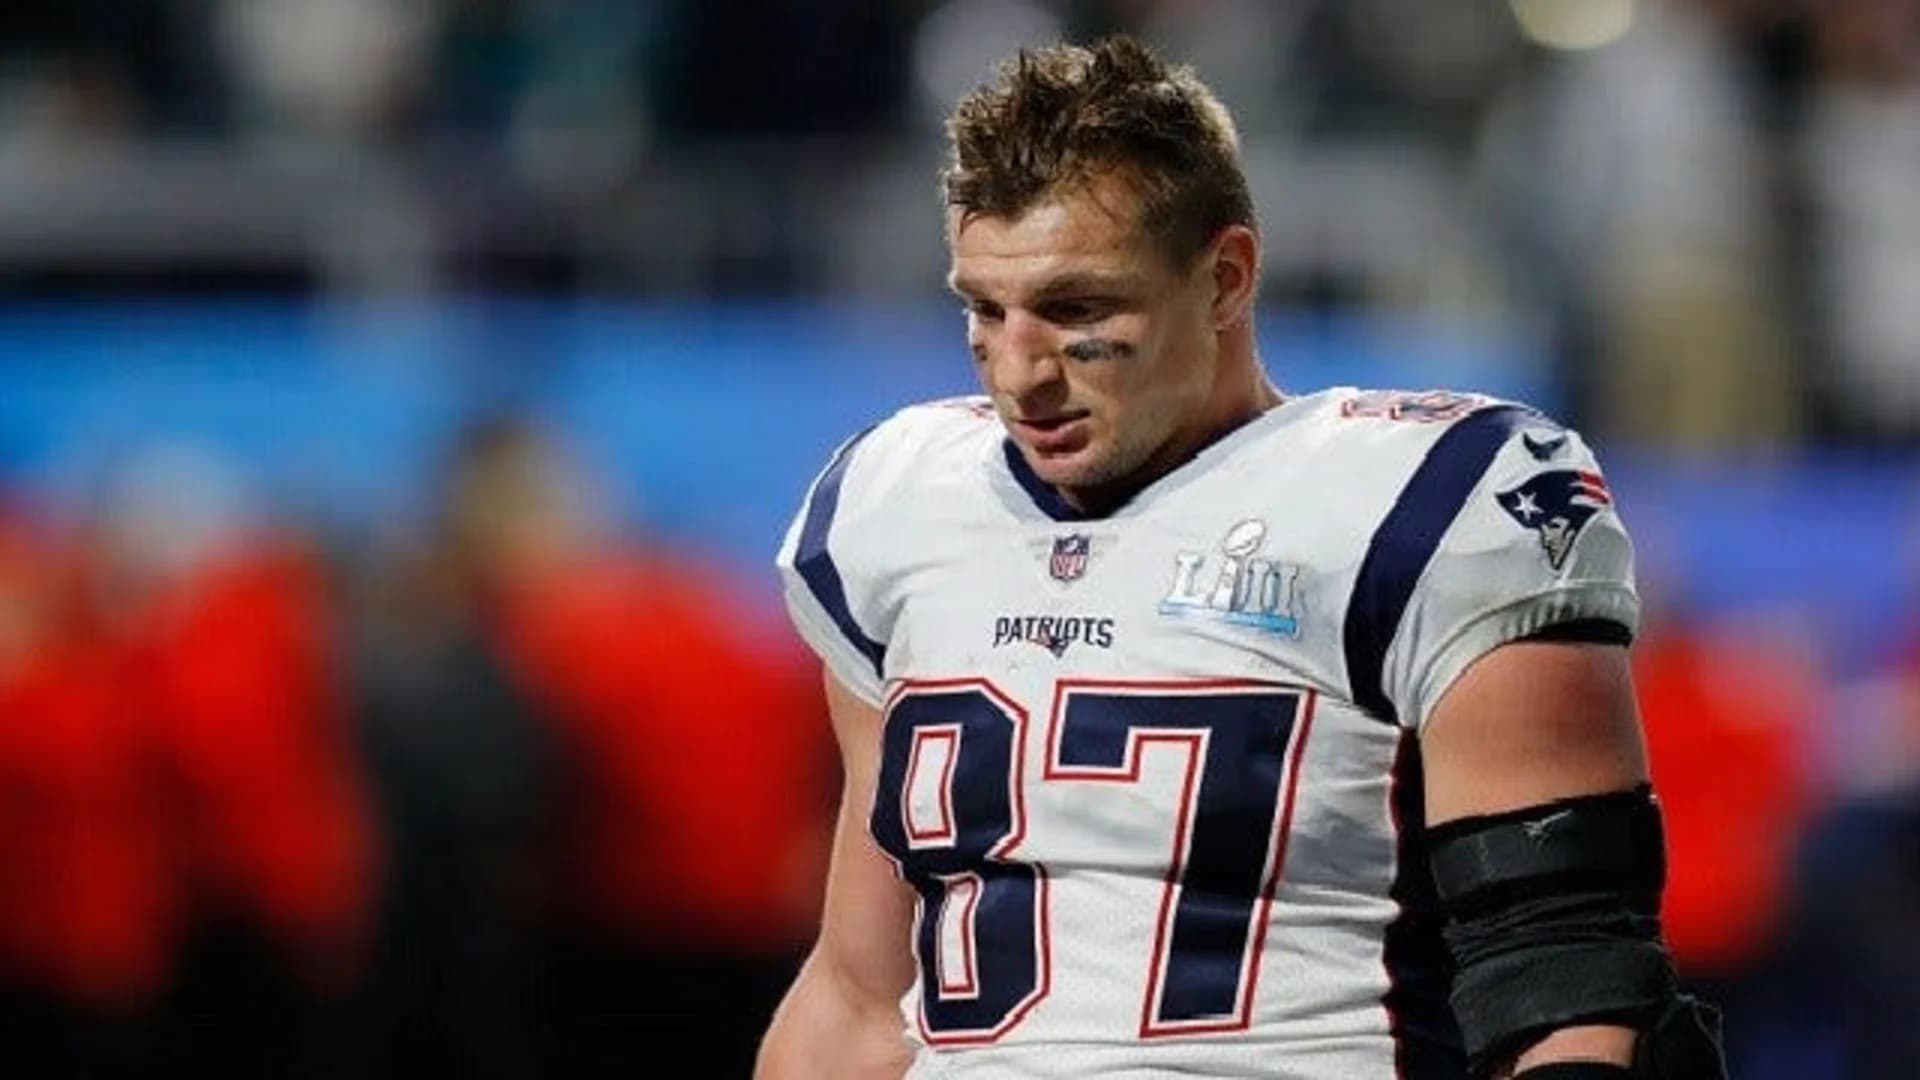 Cops: Home of Patriots’ Gronk robbed during Super Bowl week